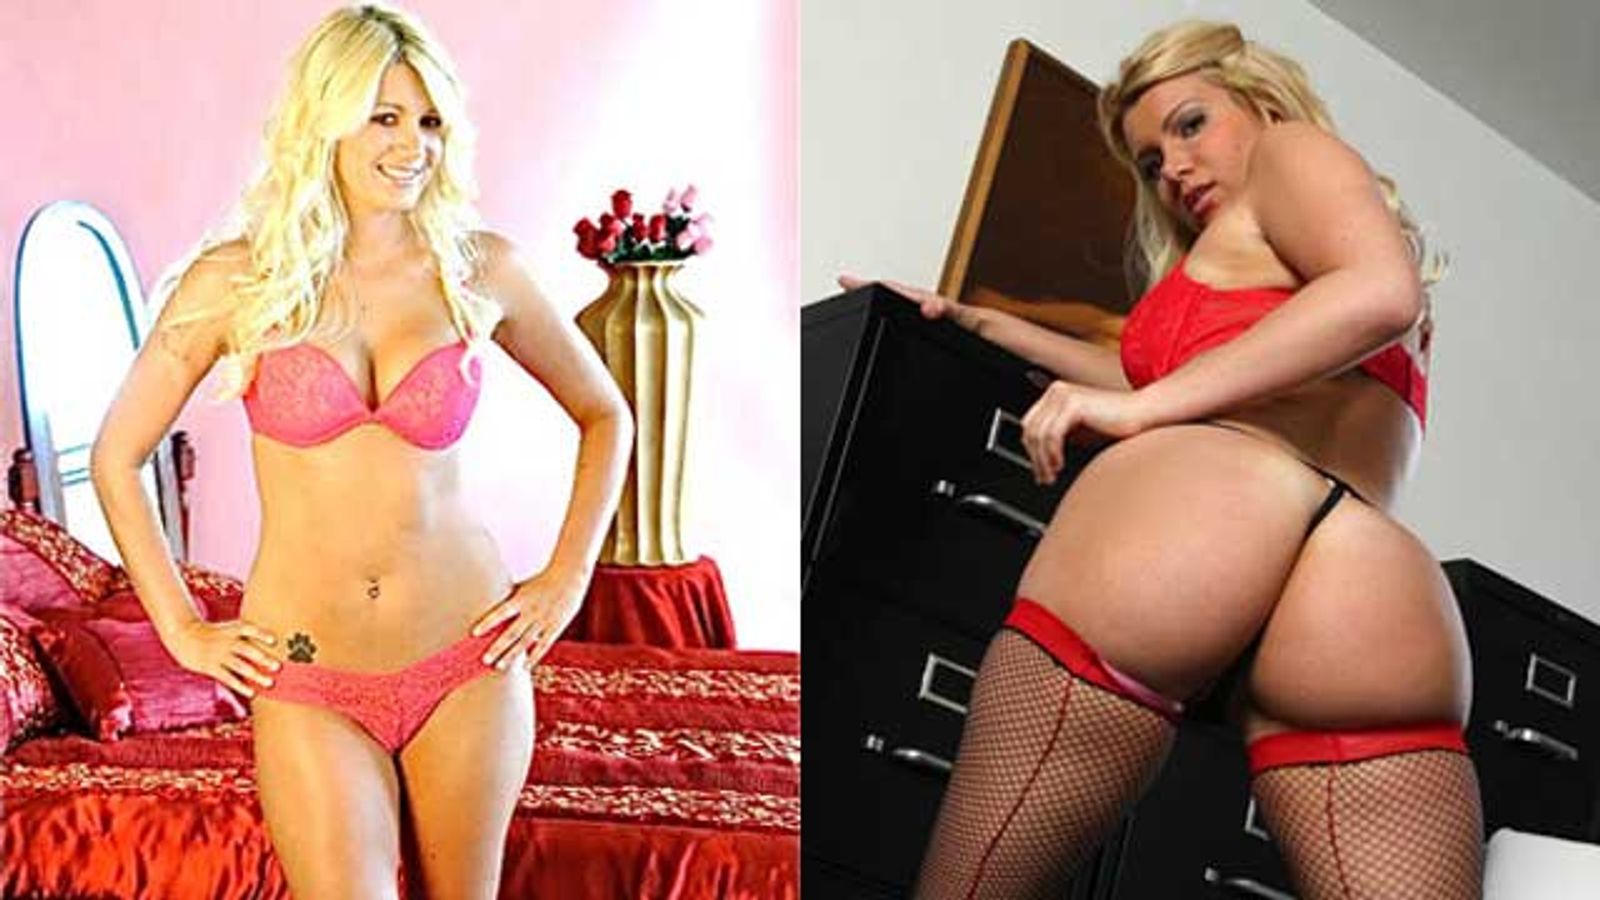 Layla Price Stars in Two New Releases From Evil Angel